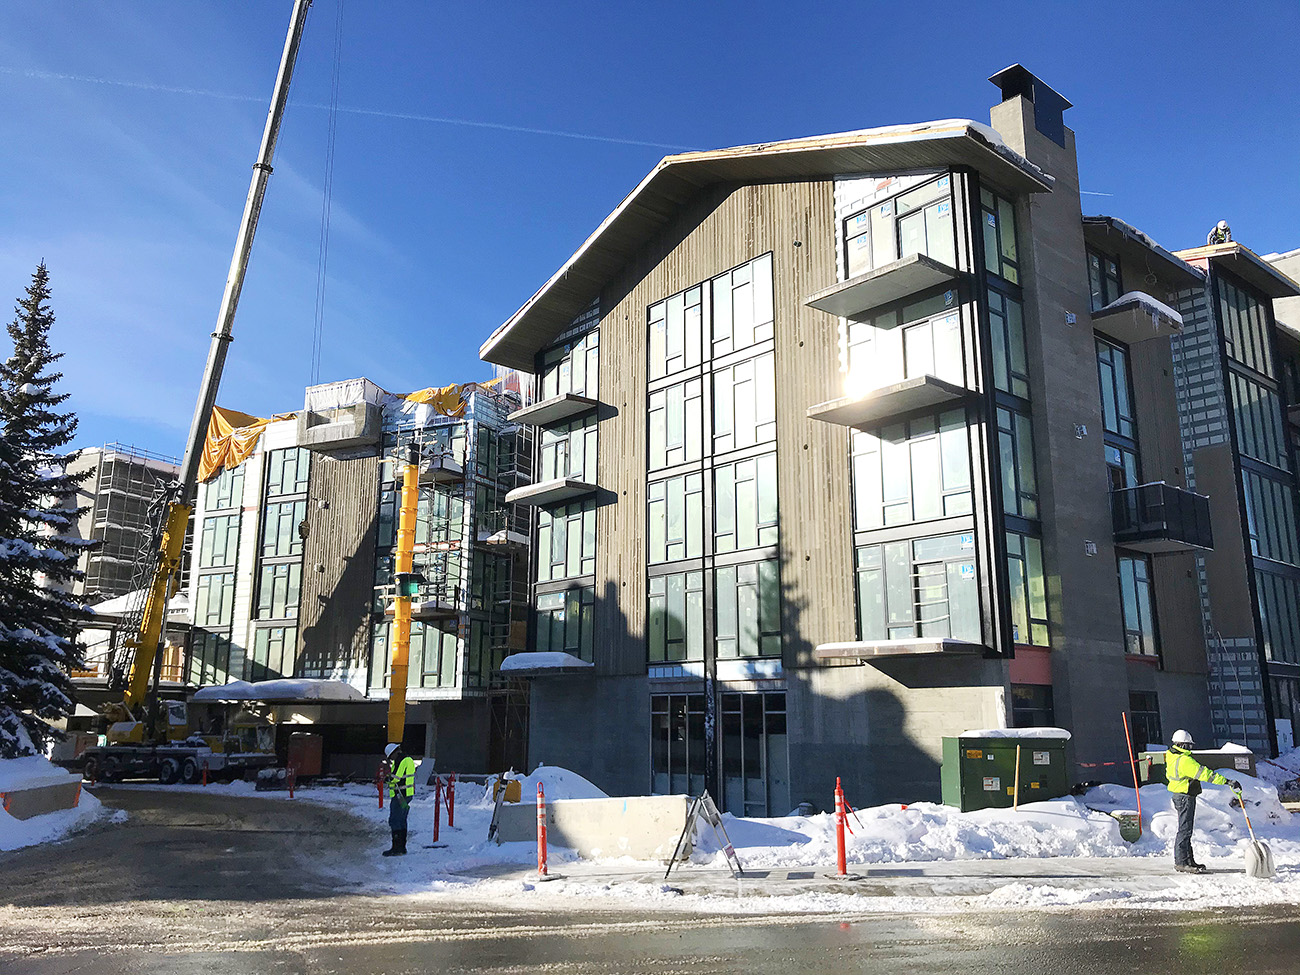 Construction Update Photos for January 2020